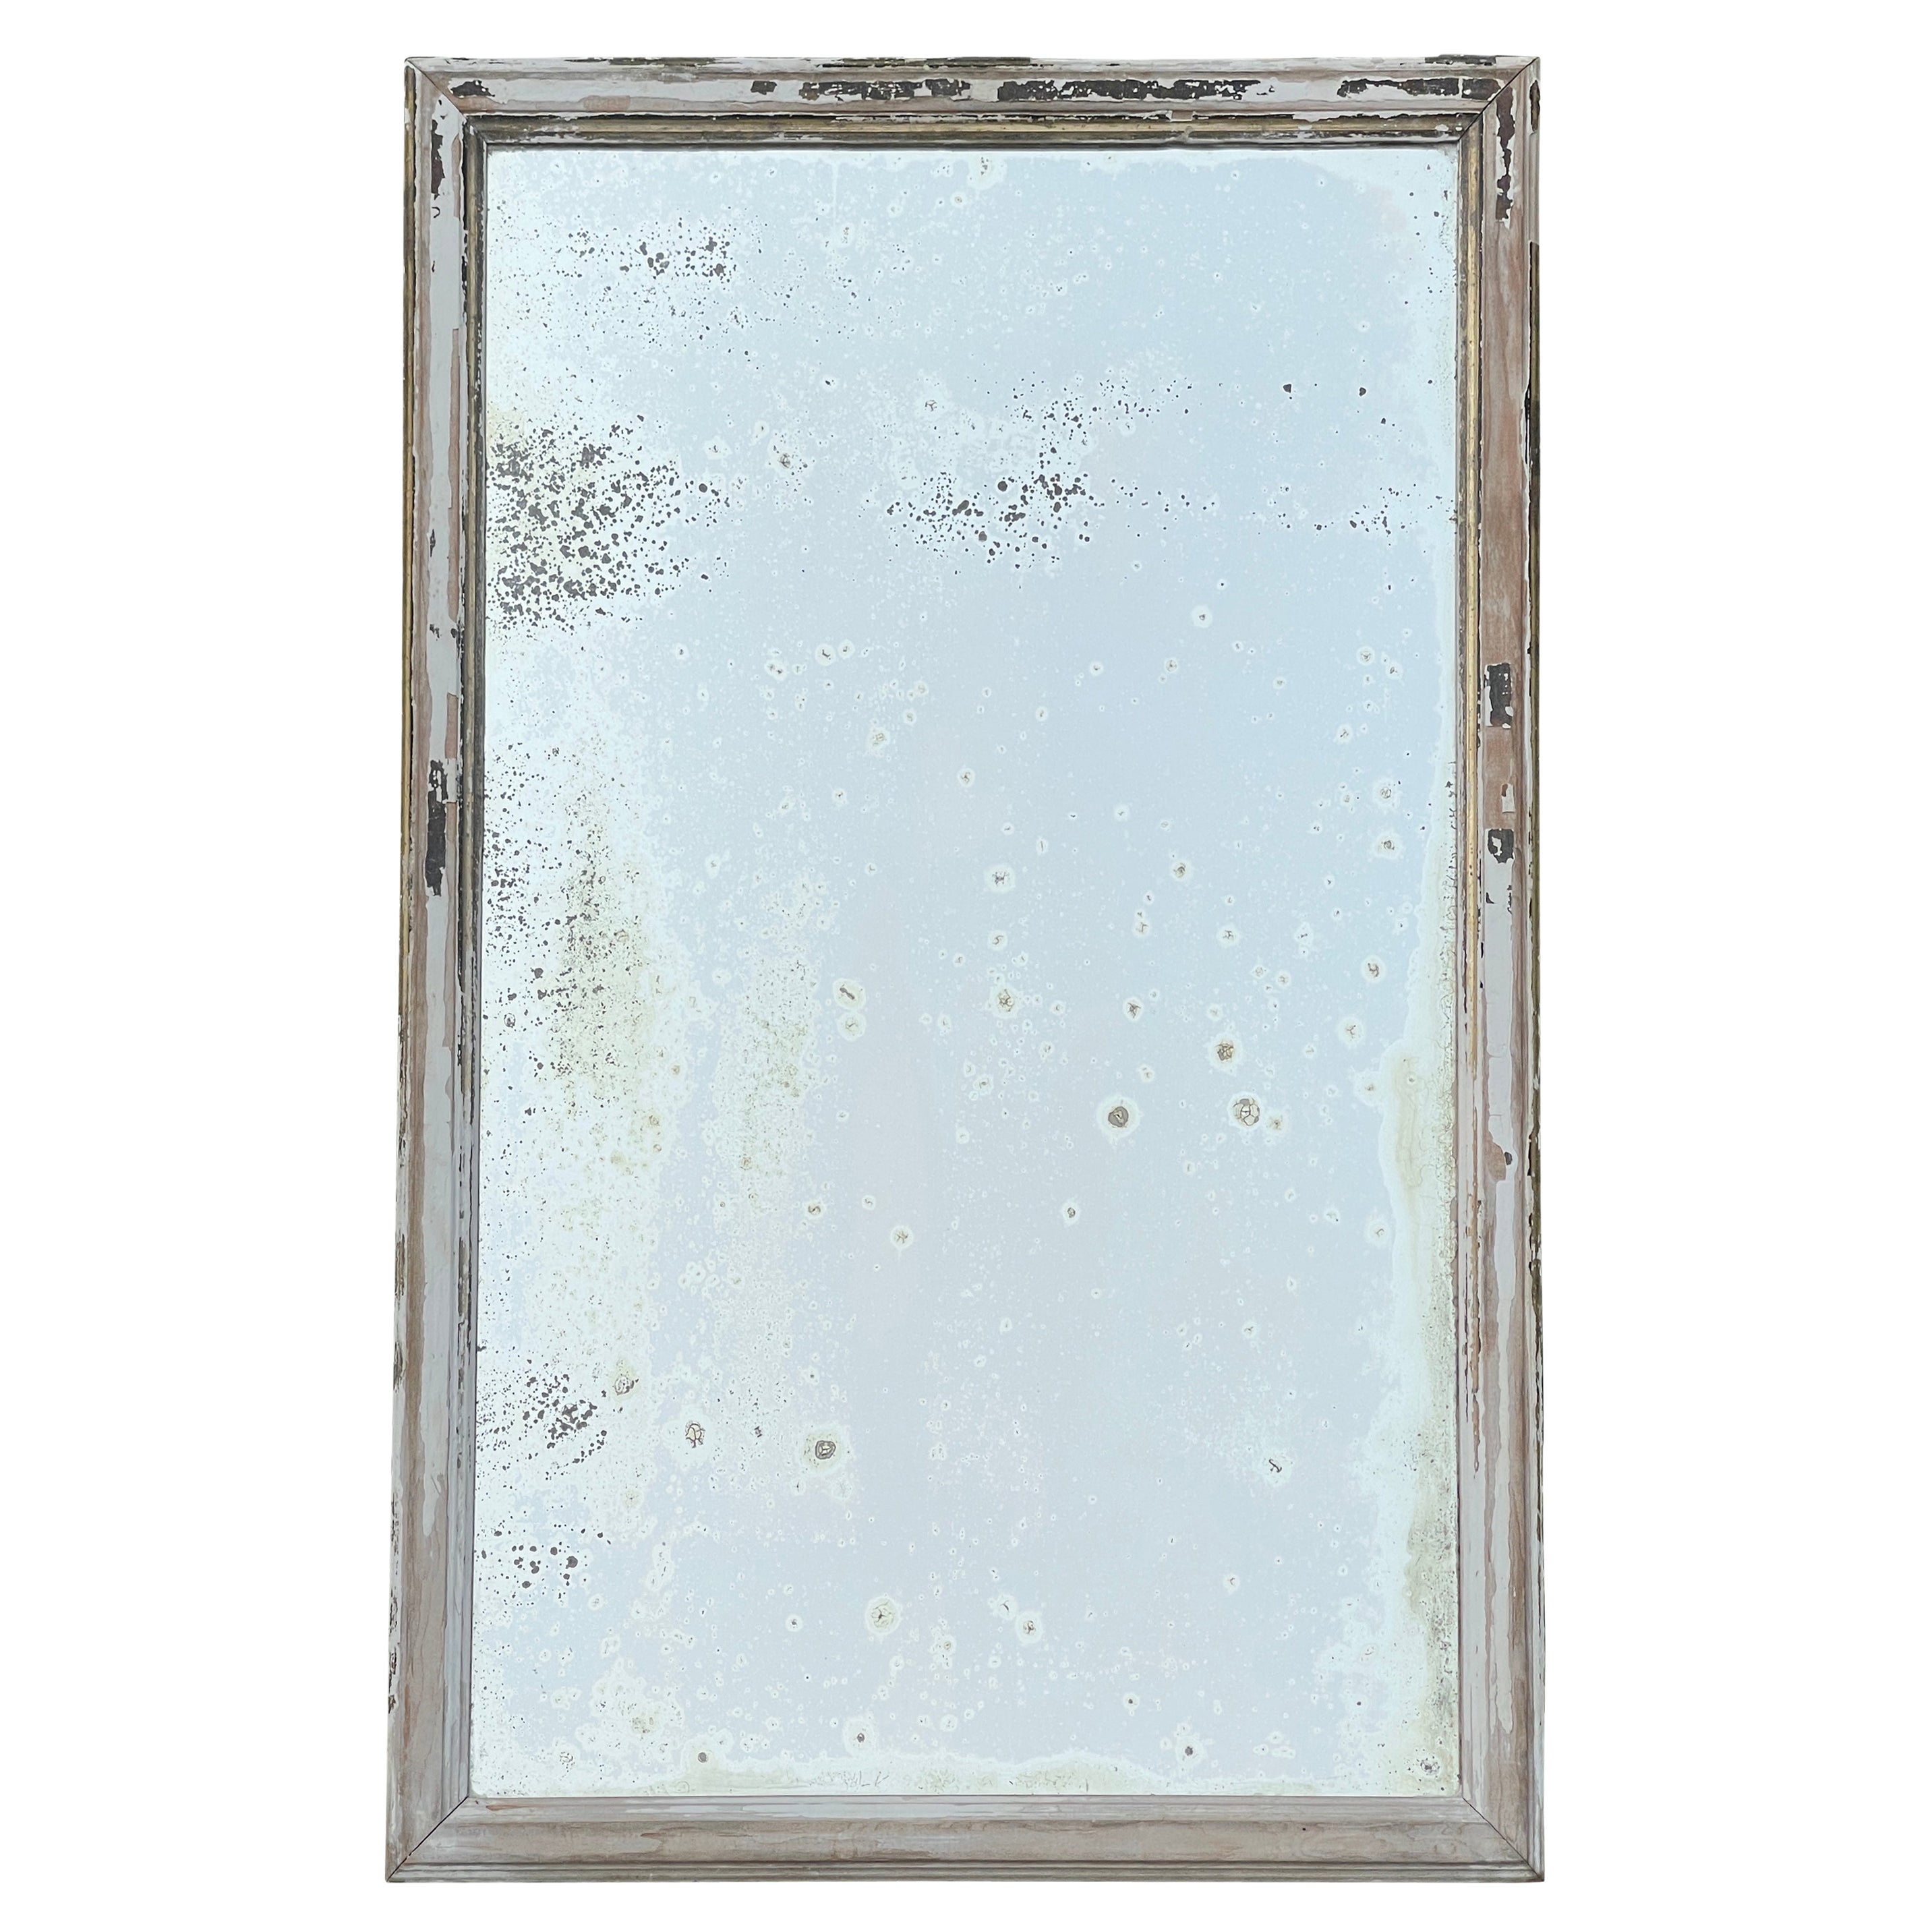 Antique Distressed Painted Wall Mirror